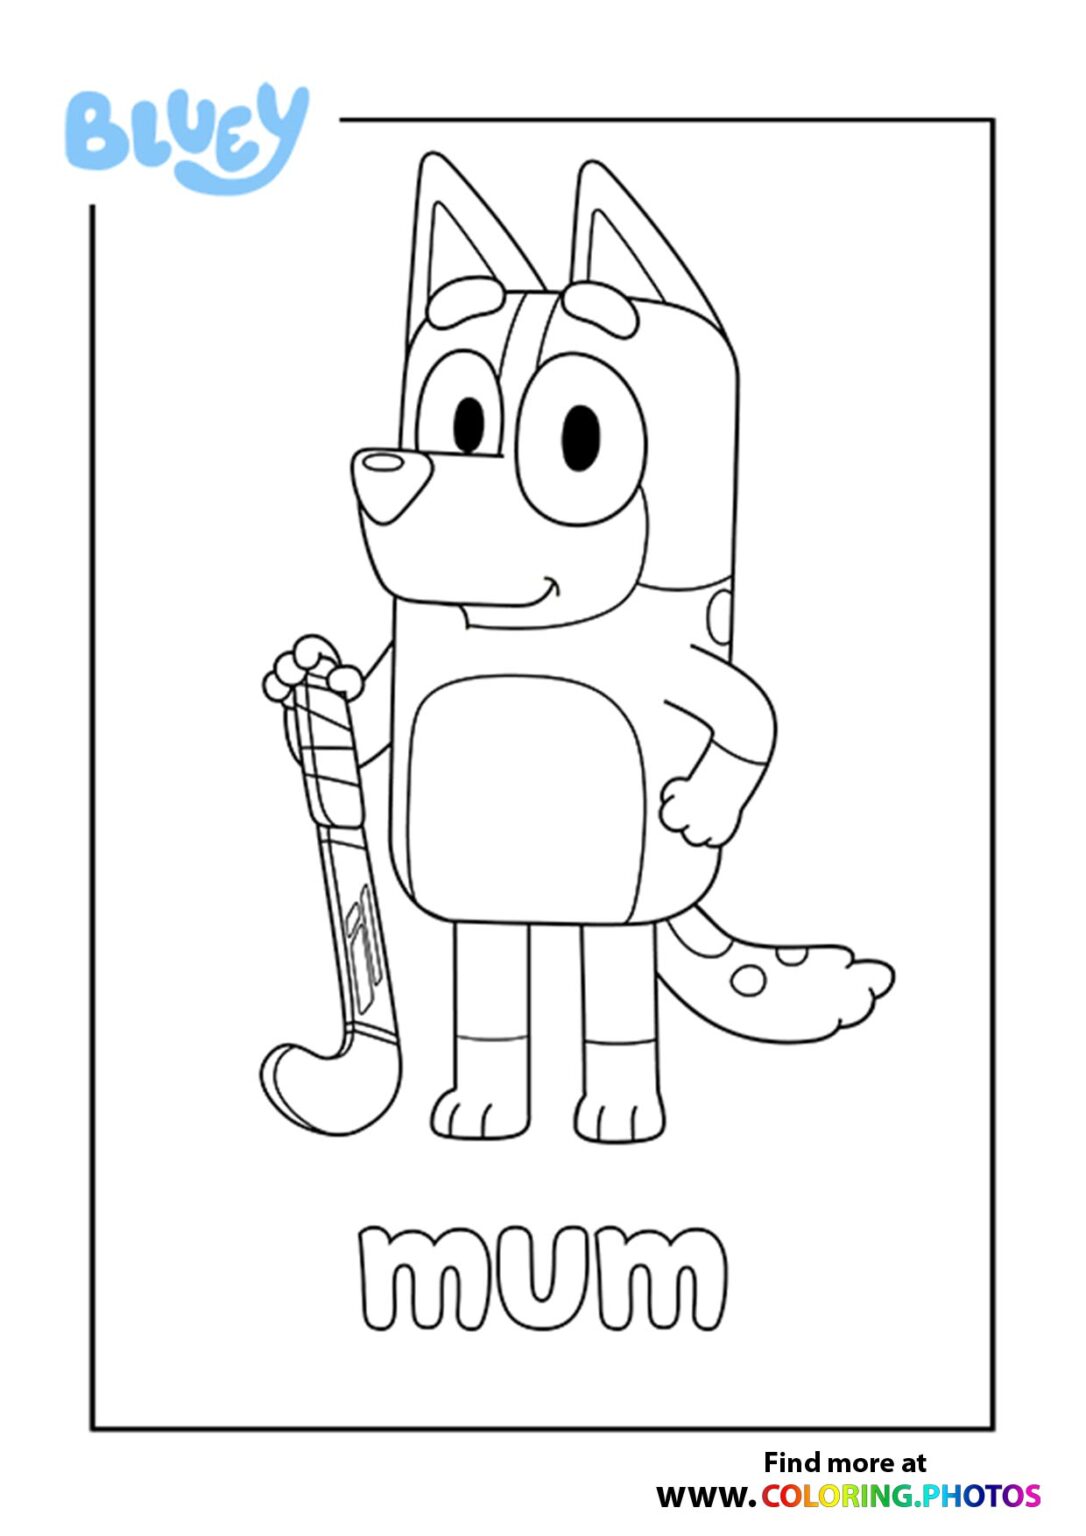 Bluey Muffin - Coloring Pages for kids